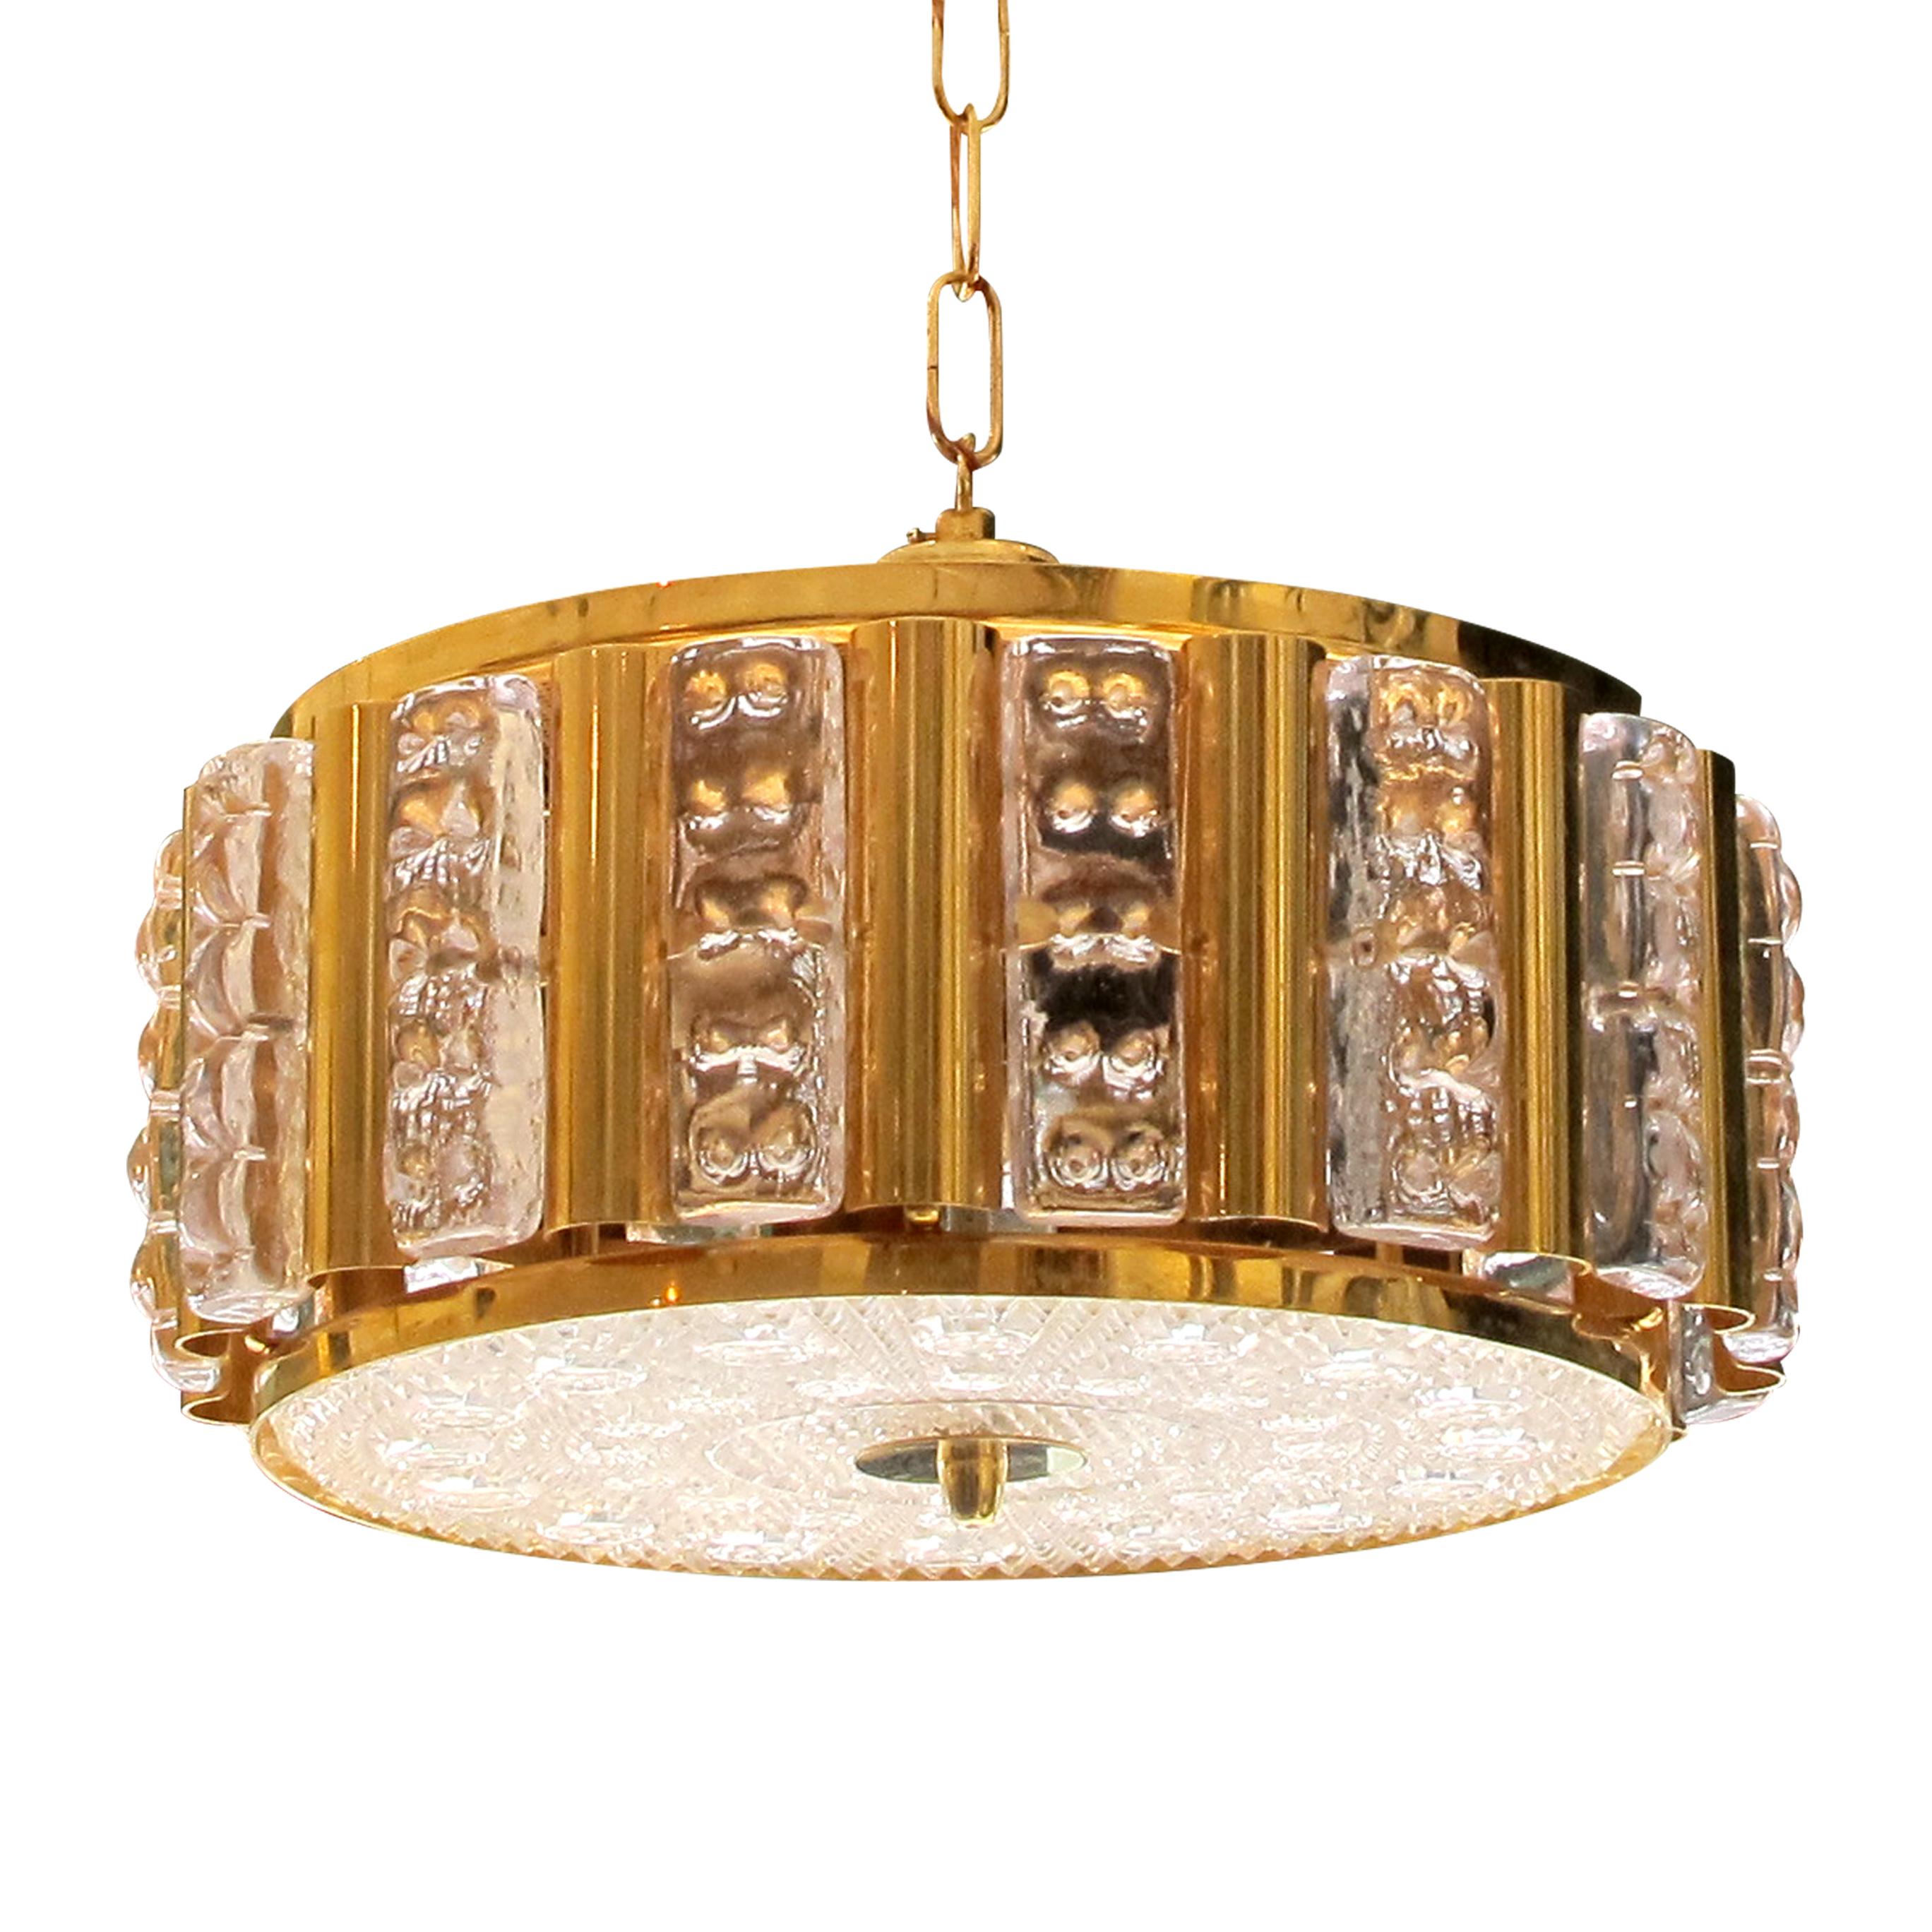 1960s glass and brass ceiling light designed by Carl Fagerlund and manufactured by Orrefors in Sweden. This elegant light is in great condition and offers a warm glowing light ideal for over a dining table, centre of a living/dining room or kitchen